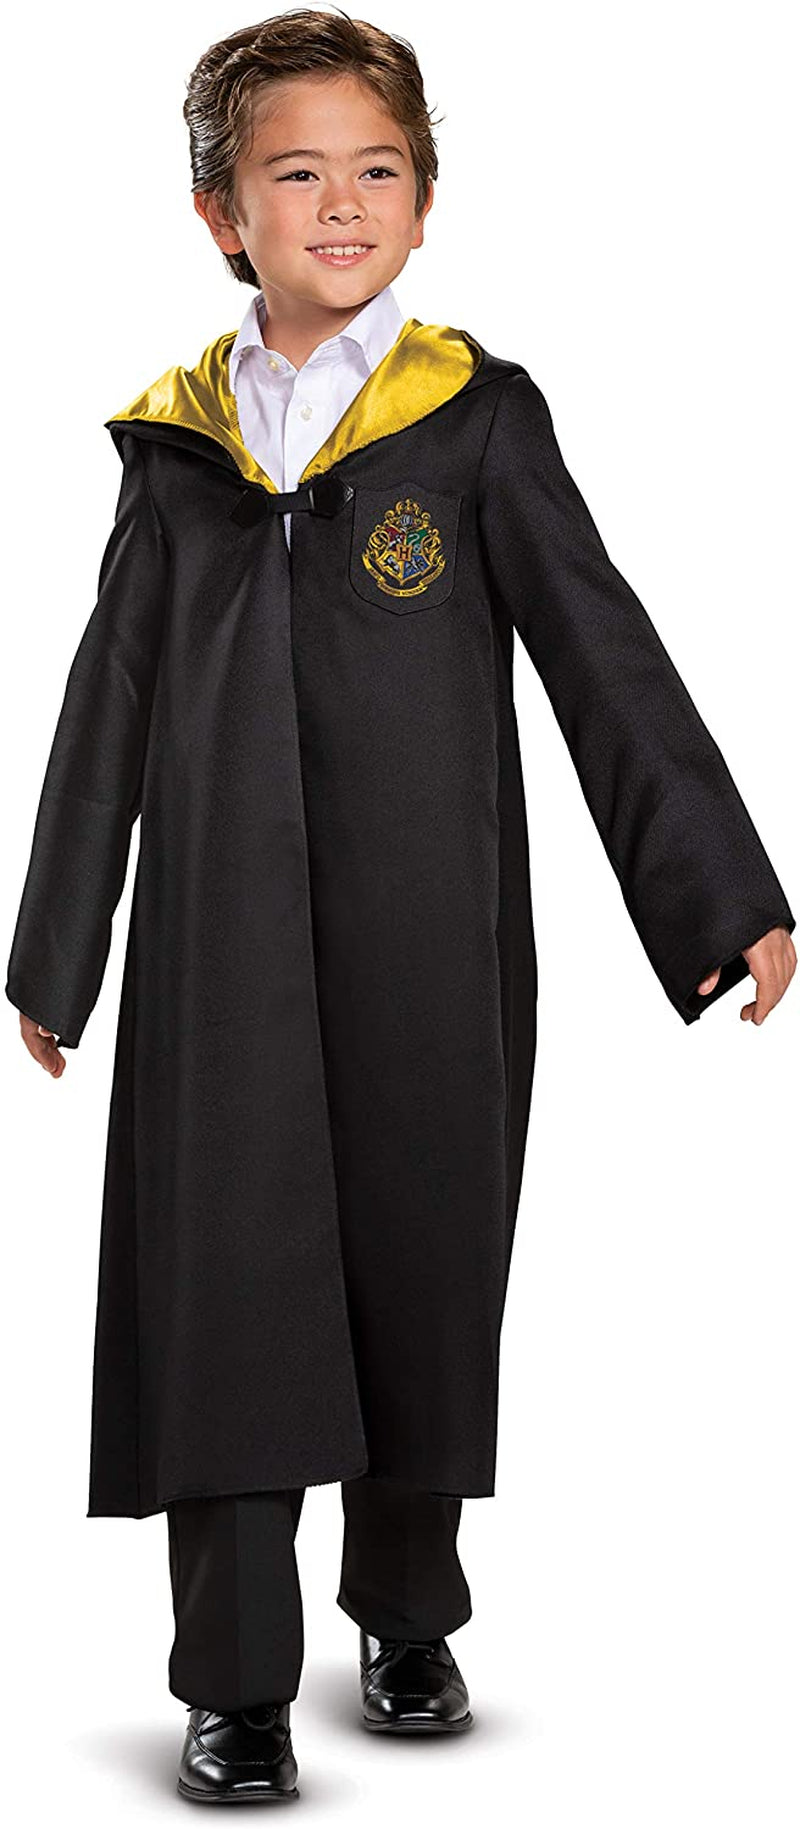 Harry Potter Robe, Official Hogwarts Wizarding World Costume Robes, Classic Kids Size Dress up Accessory  Disguise Hogwarts 10-12 